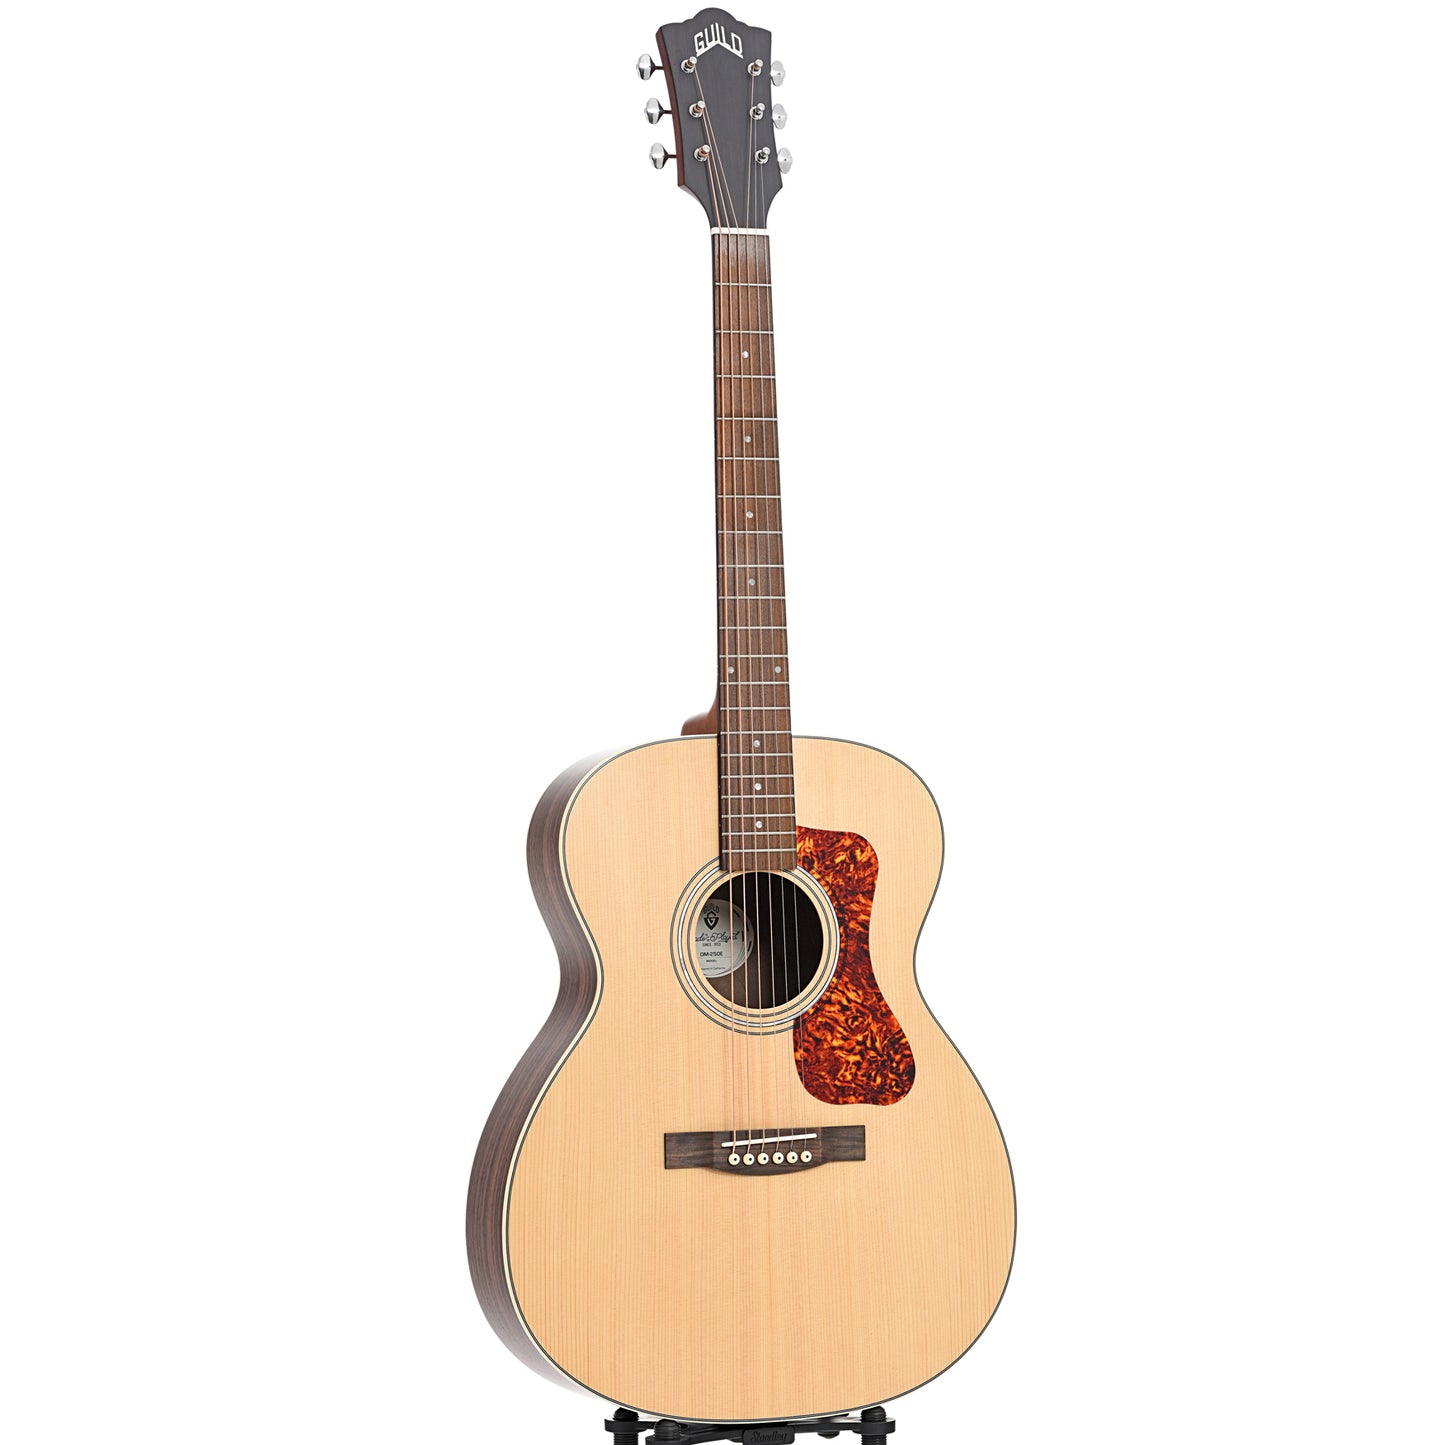 Full front and side of Guild OM-250E Limited Archback Natural Acoustic Guitar